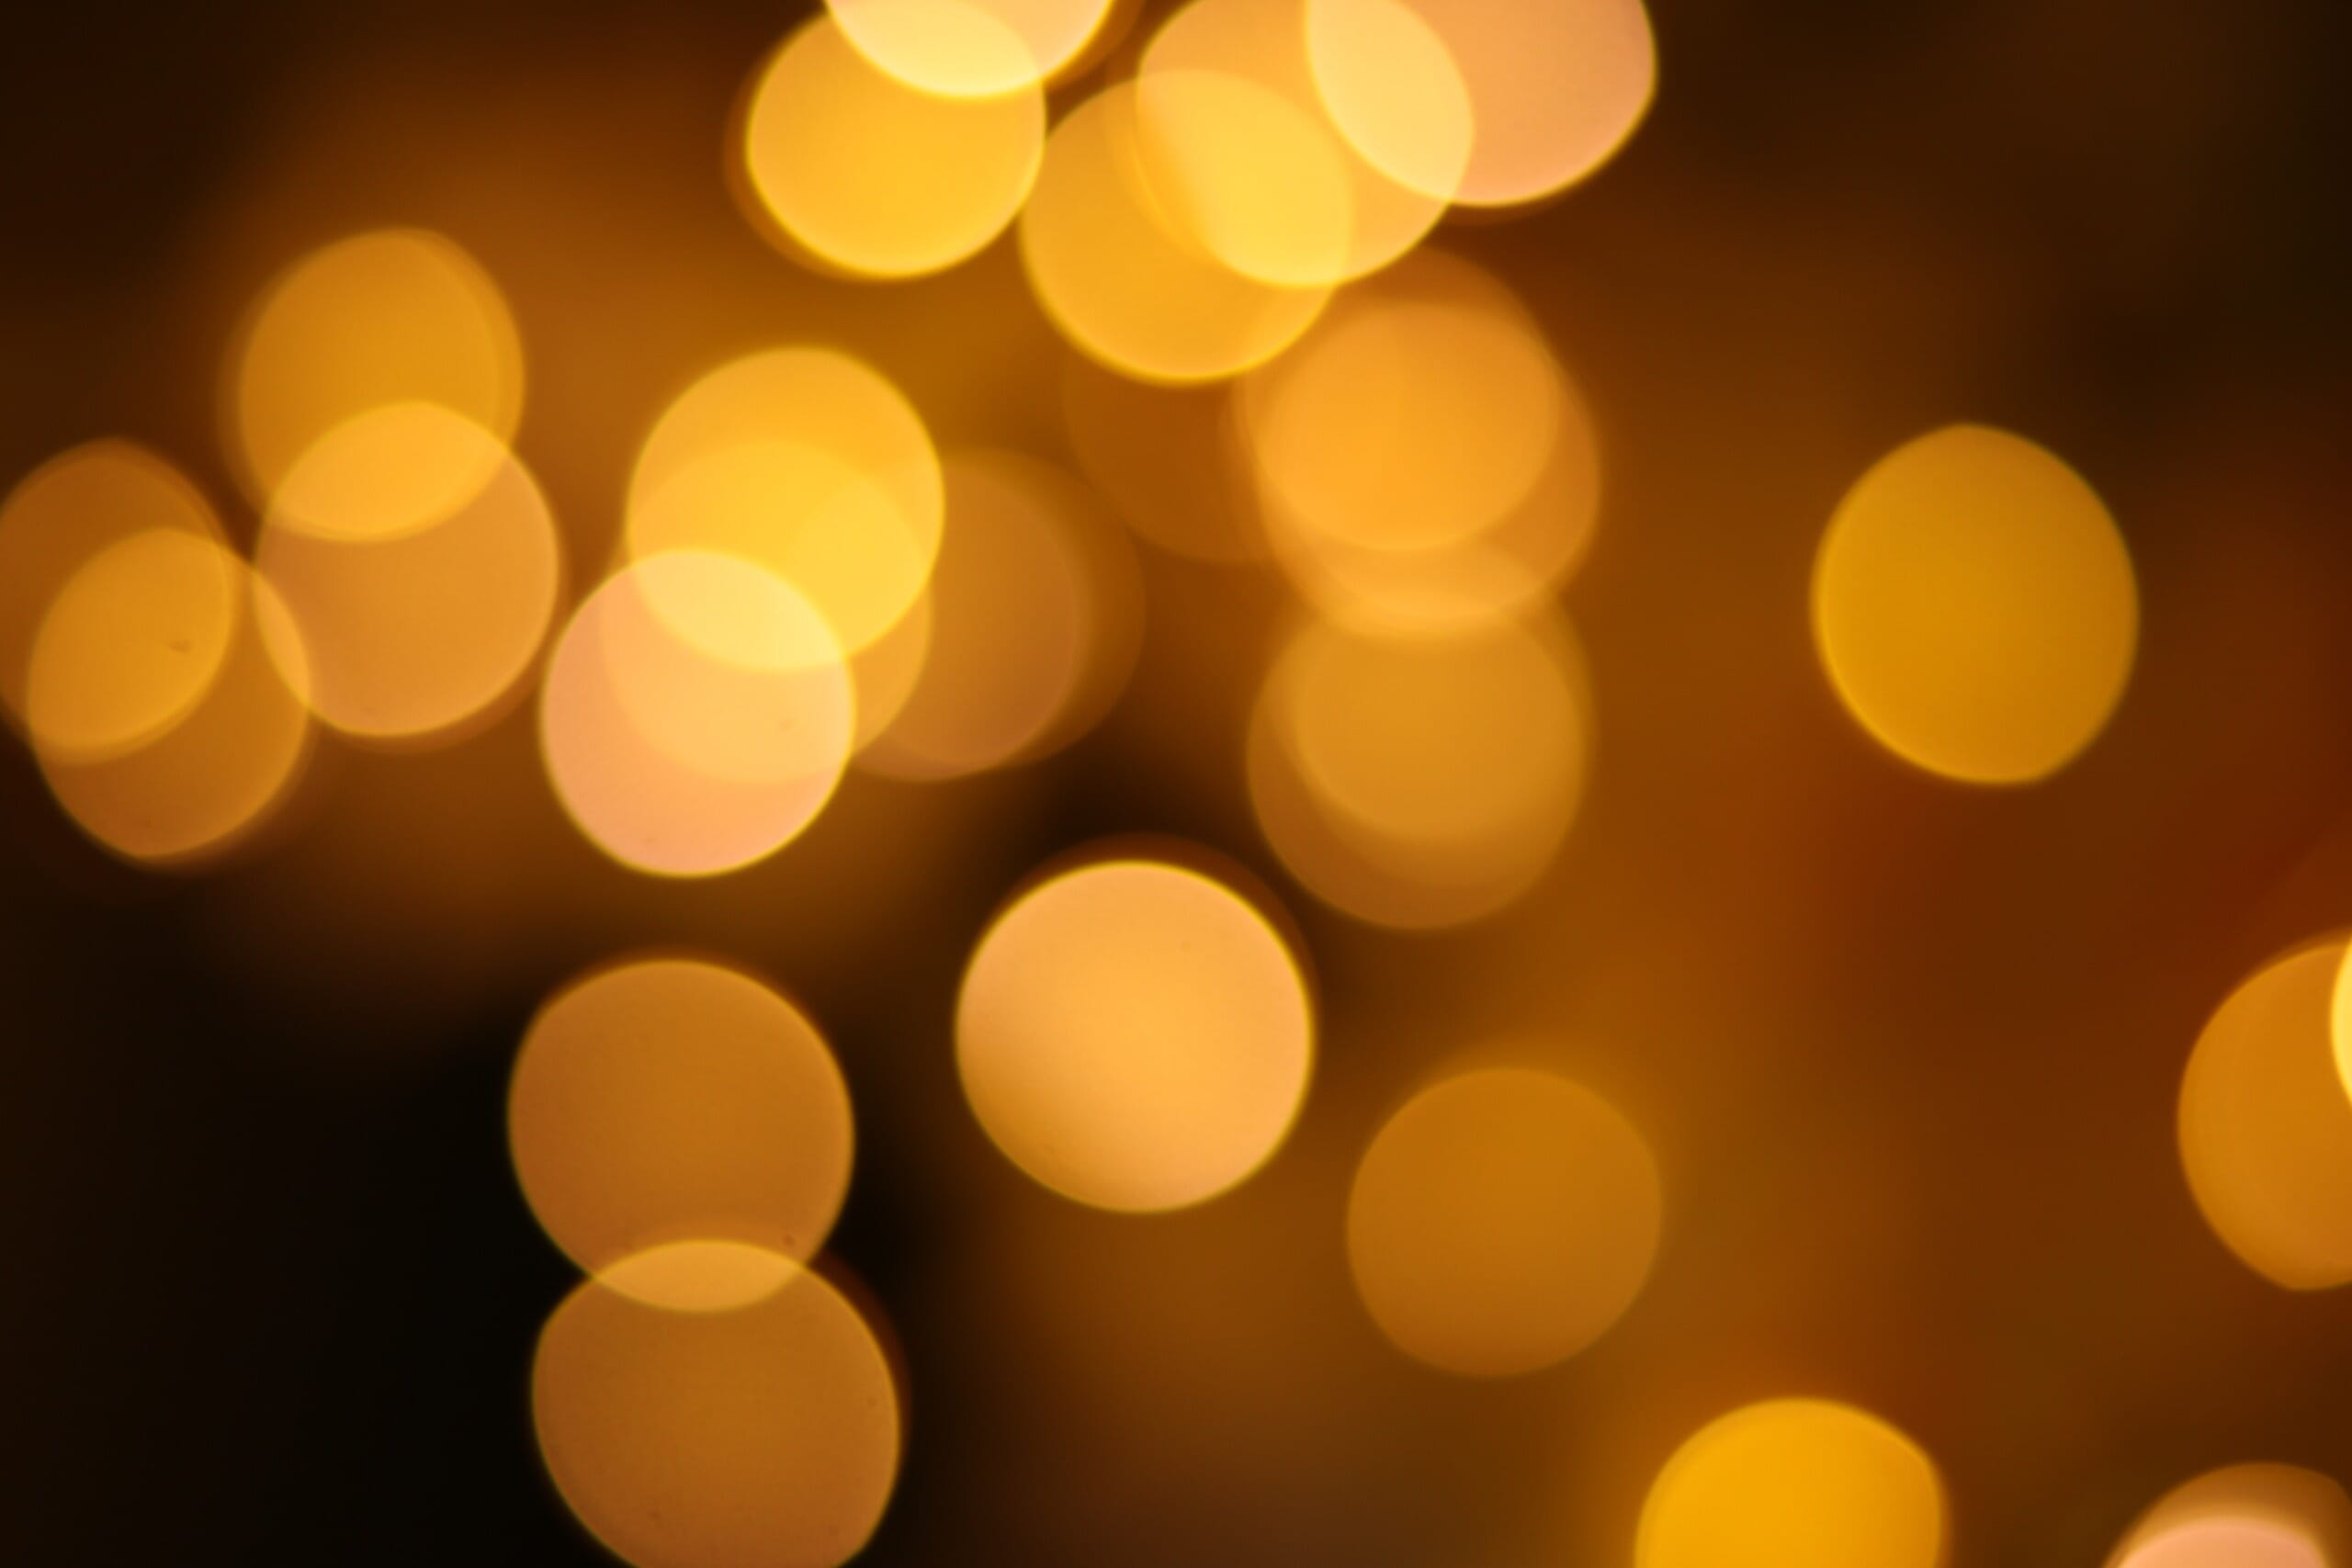 Capturing bokeh example of a cluster of yellow lights surrounded by darkness.